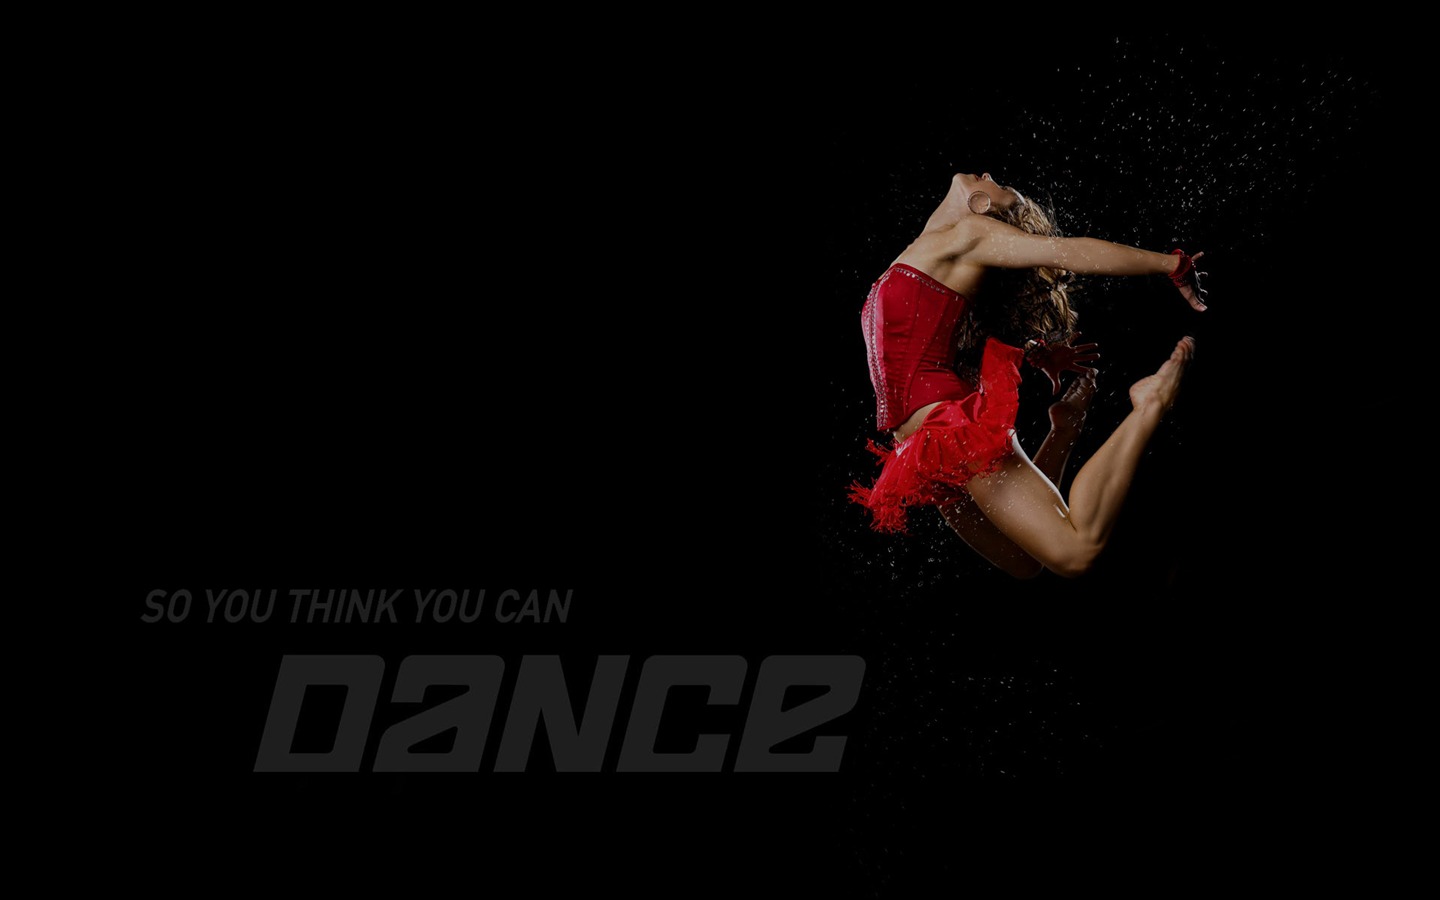 So You Think You Can Dance wallpaper (2) #1 - 1440x900